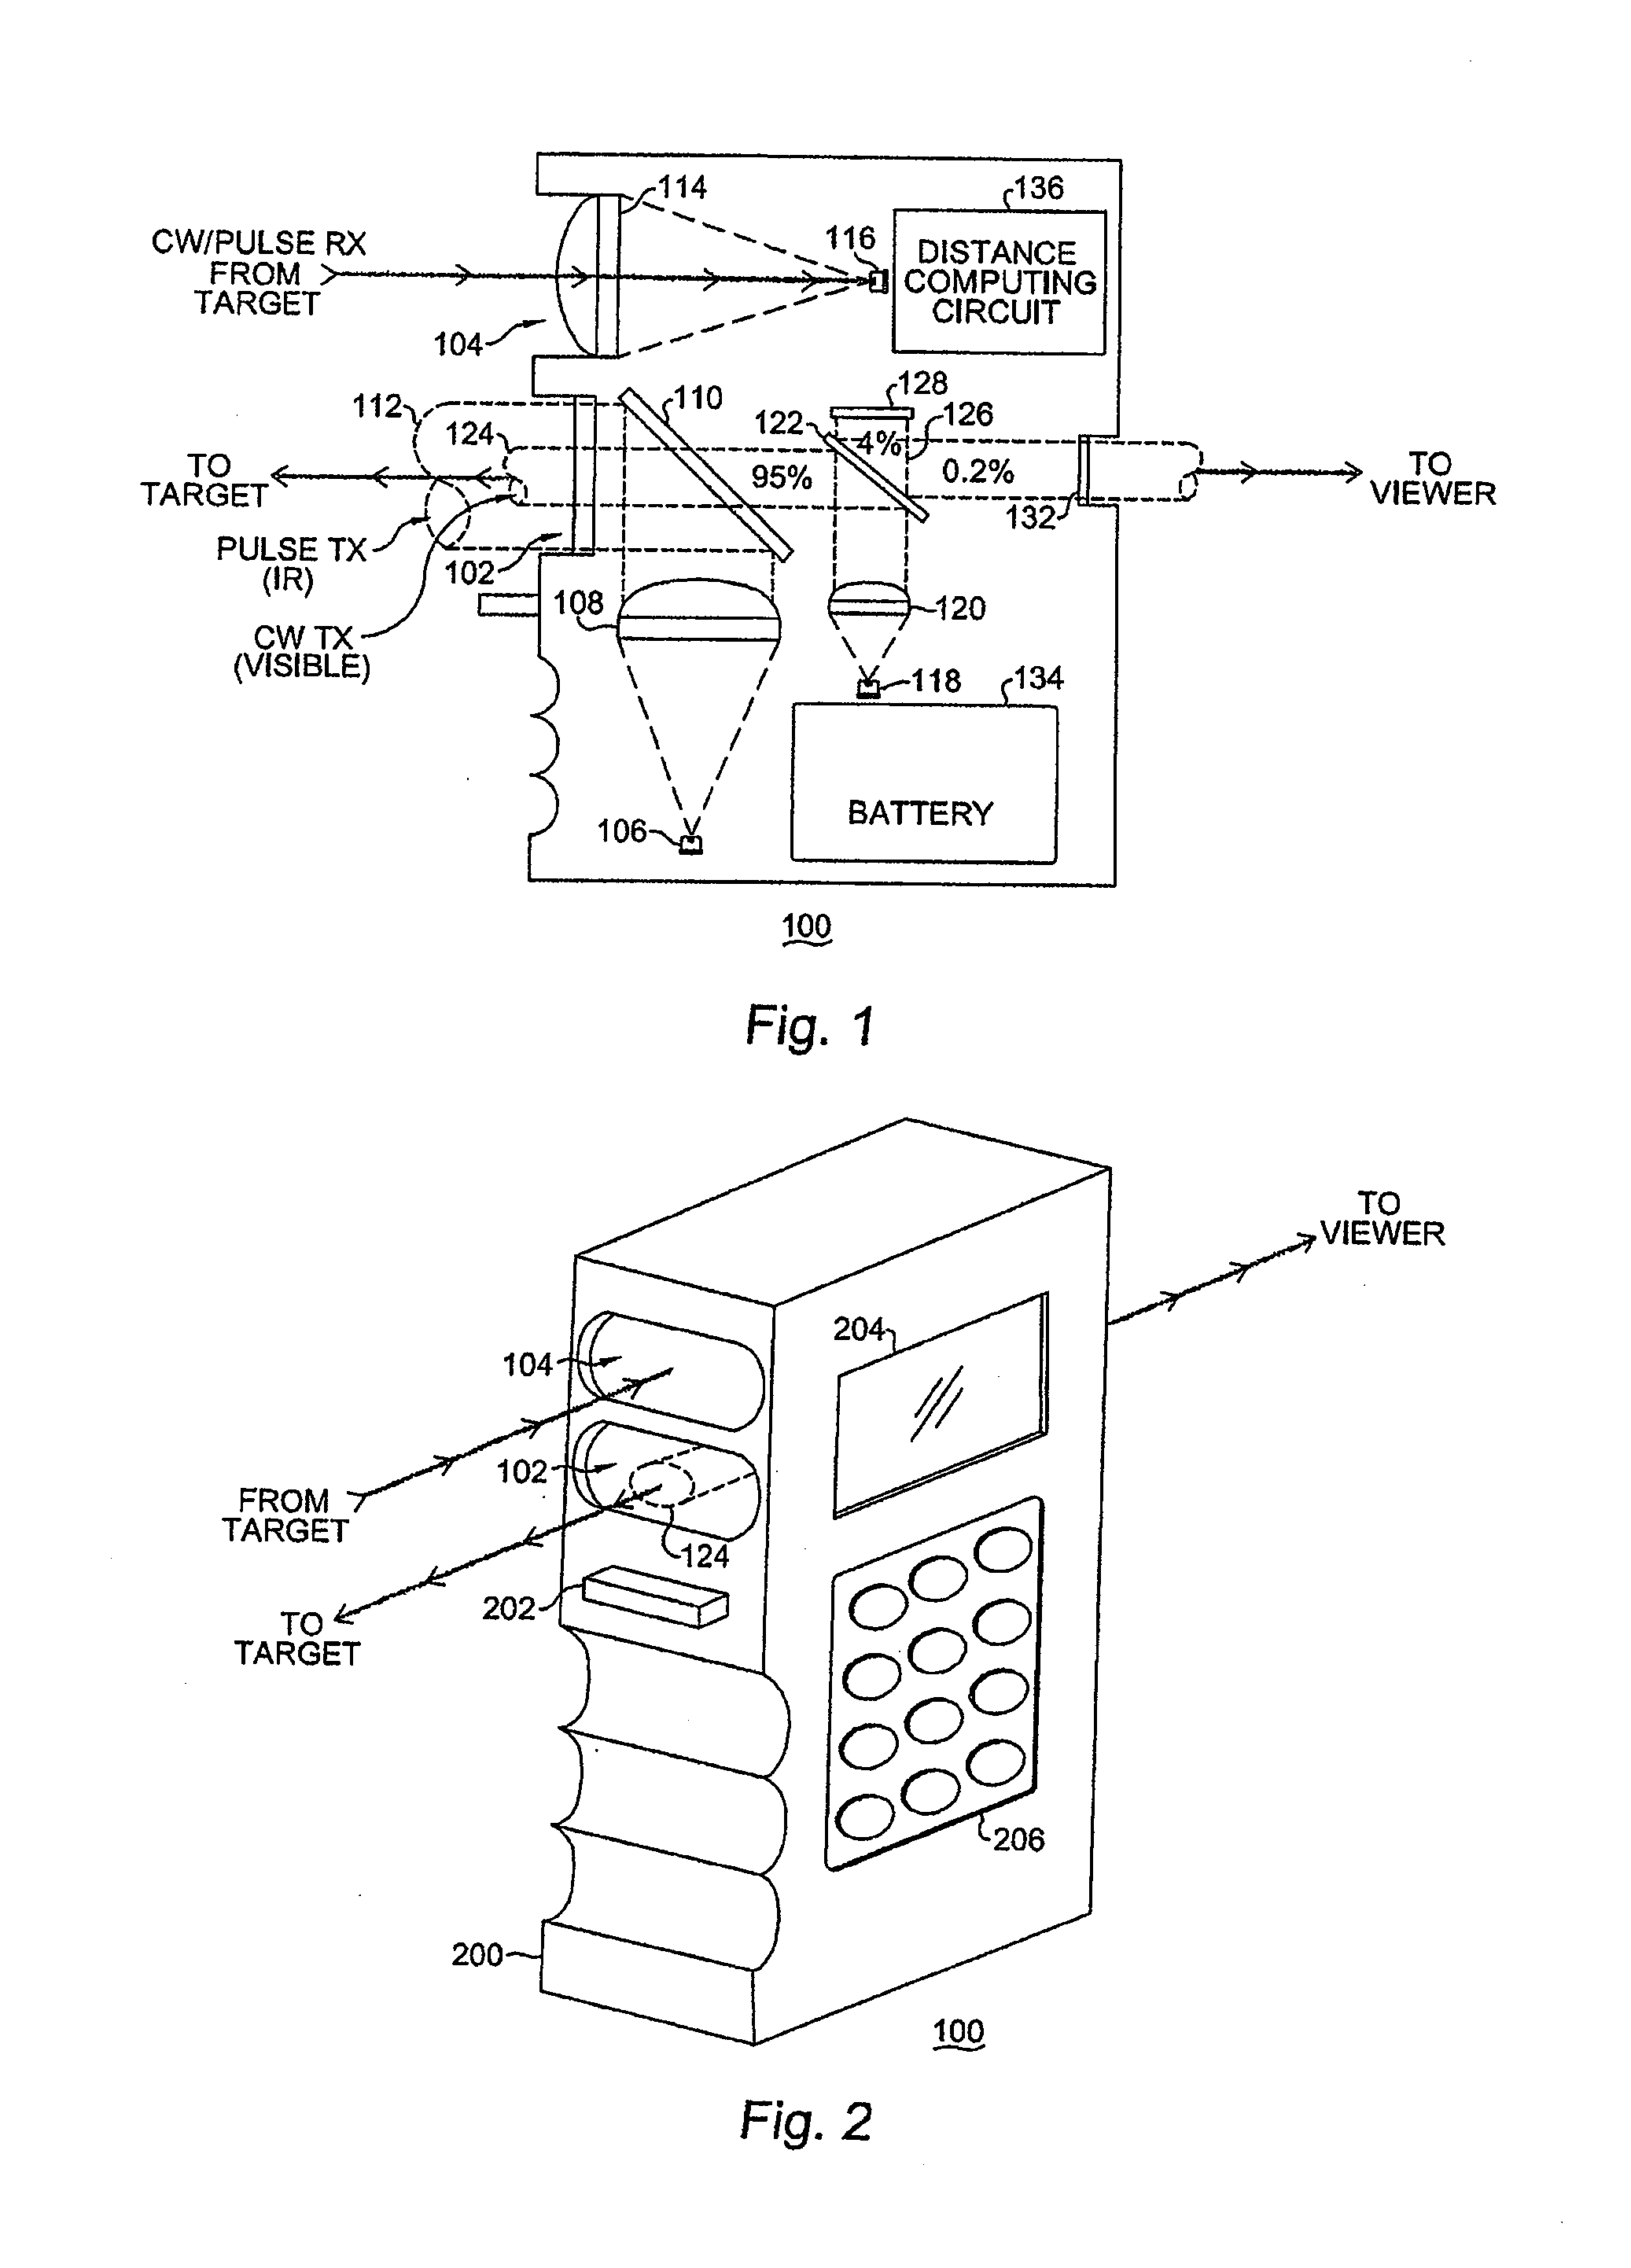 System and method for a rangefinding instrument incorporating pulse and continuous wave signal generating and processing techniques for increased distance measurement accuracy